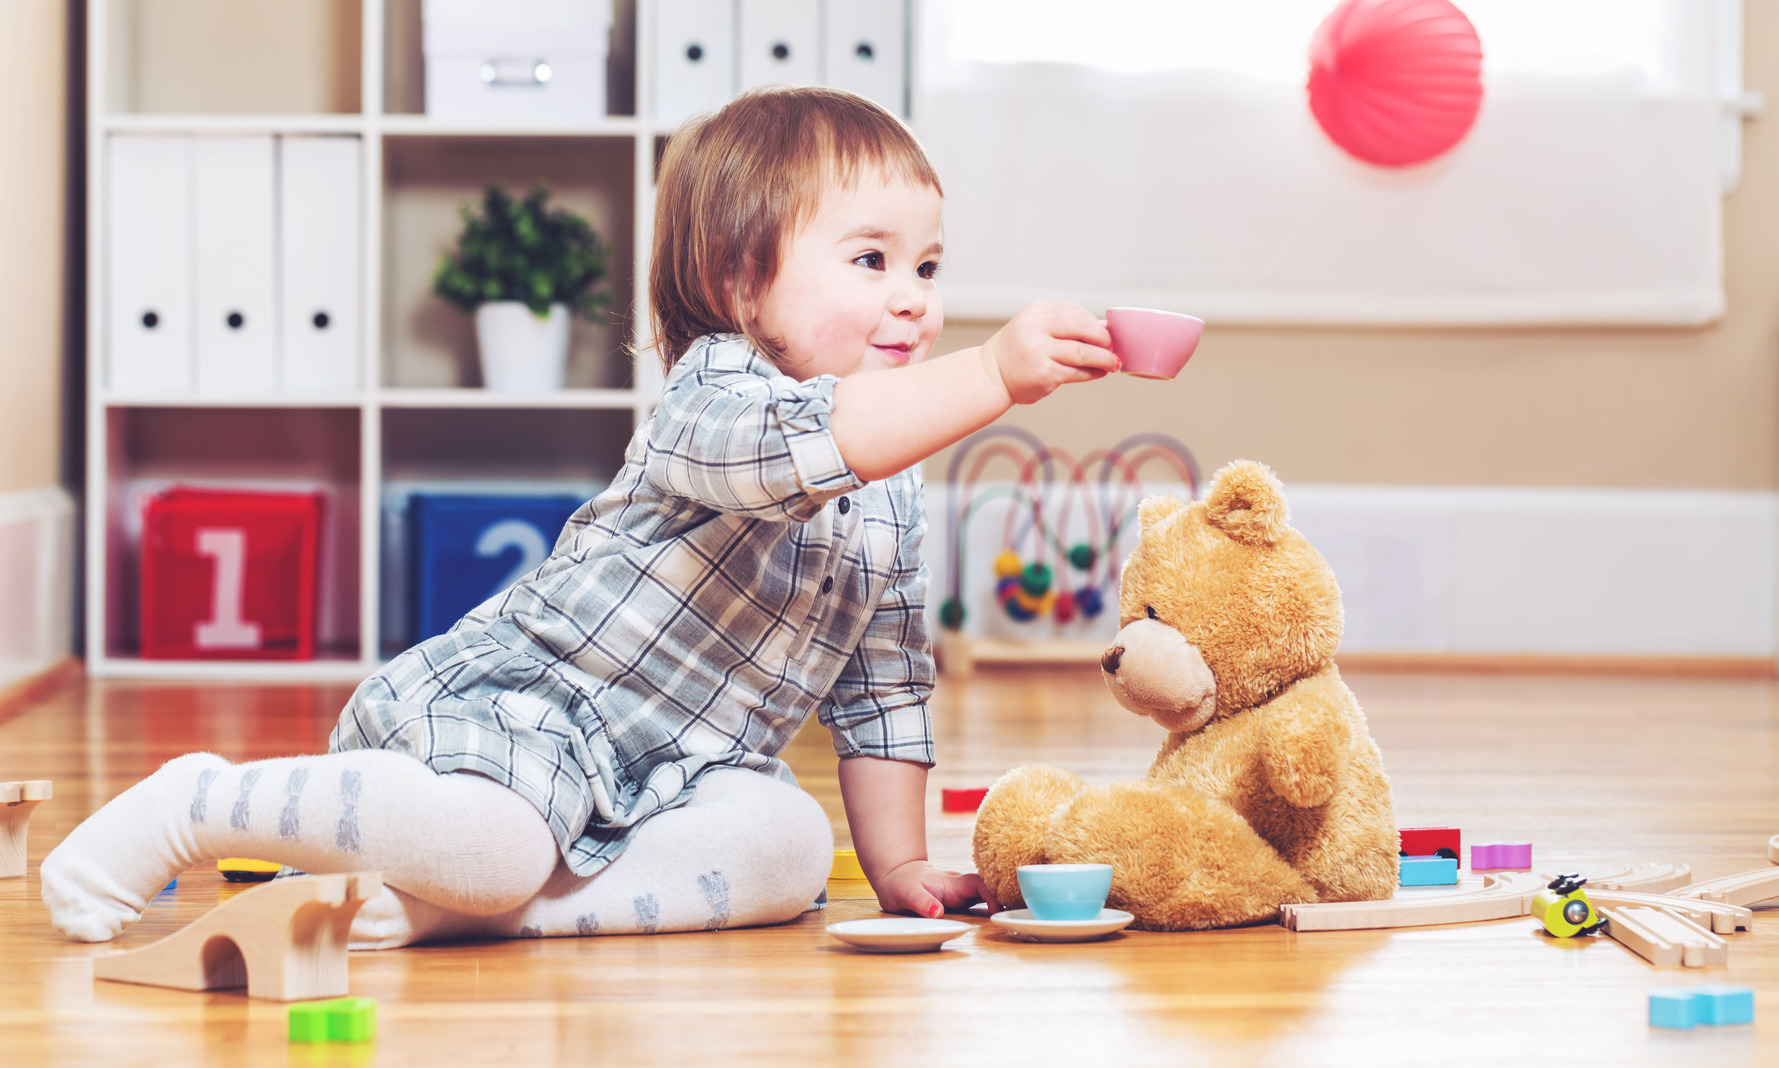 Happy toddler girl playing with her teddy bear